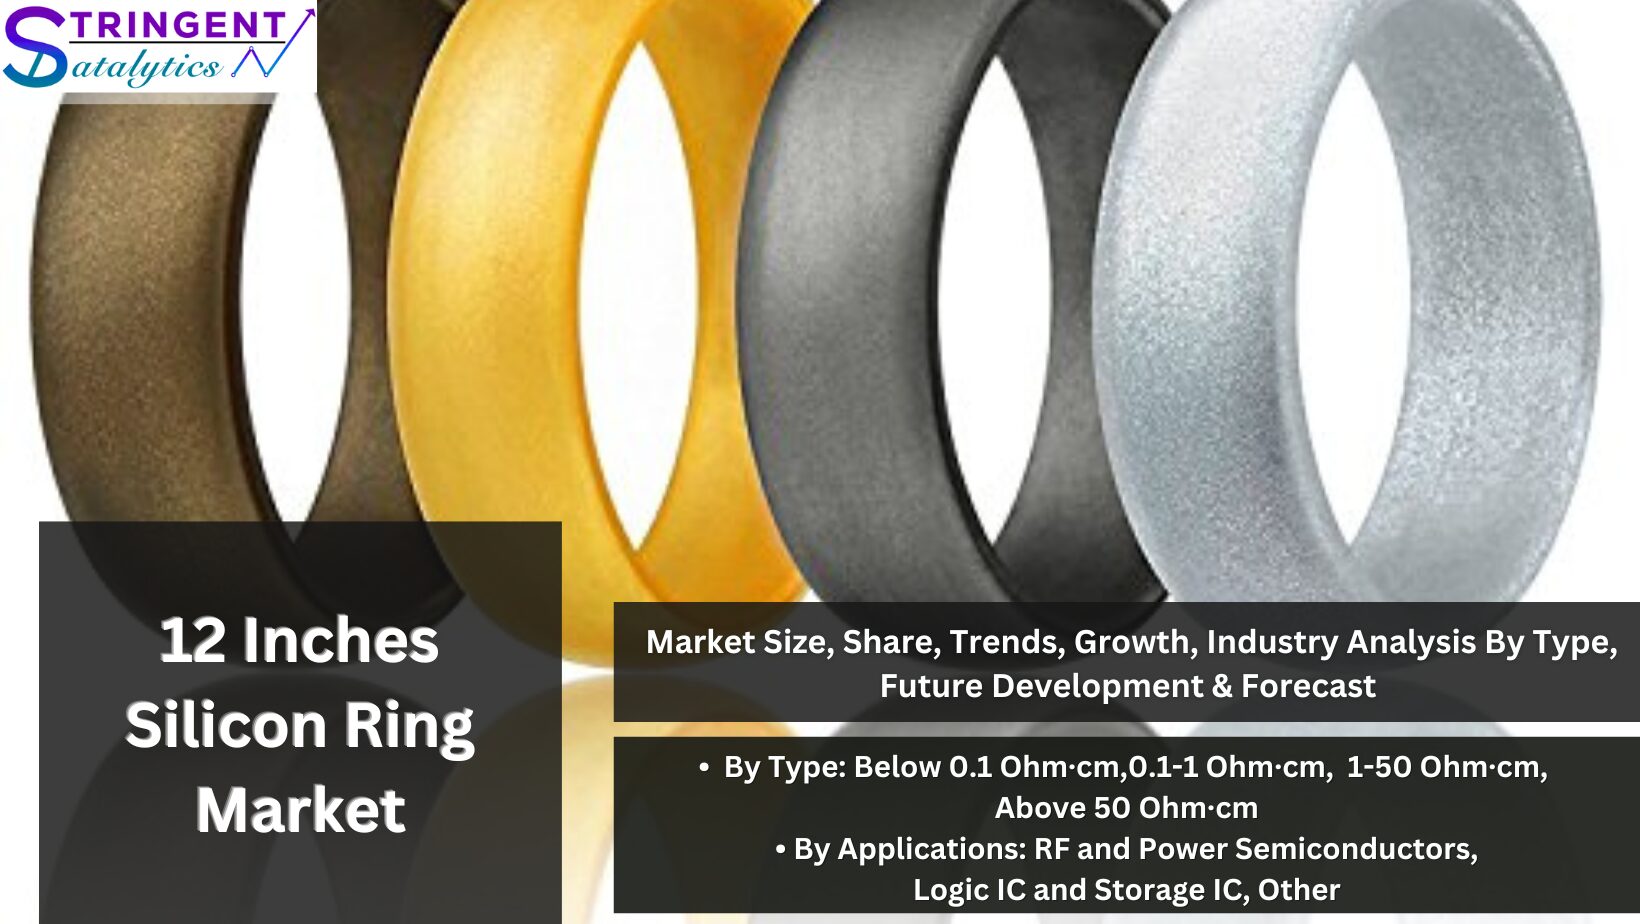 12 Inches Silicon Ring Market